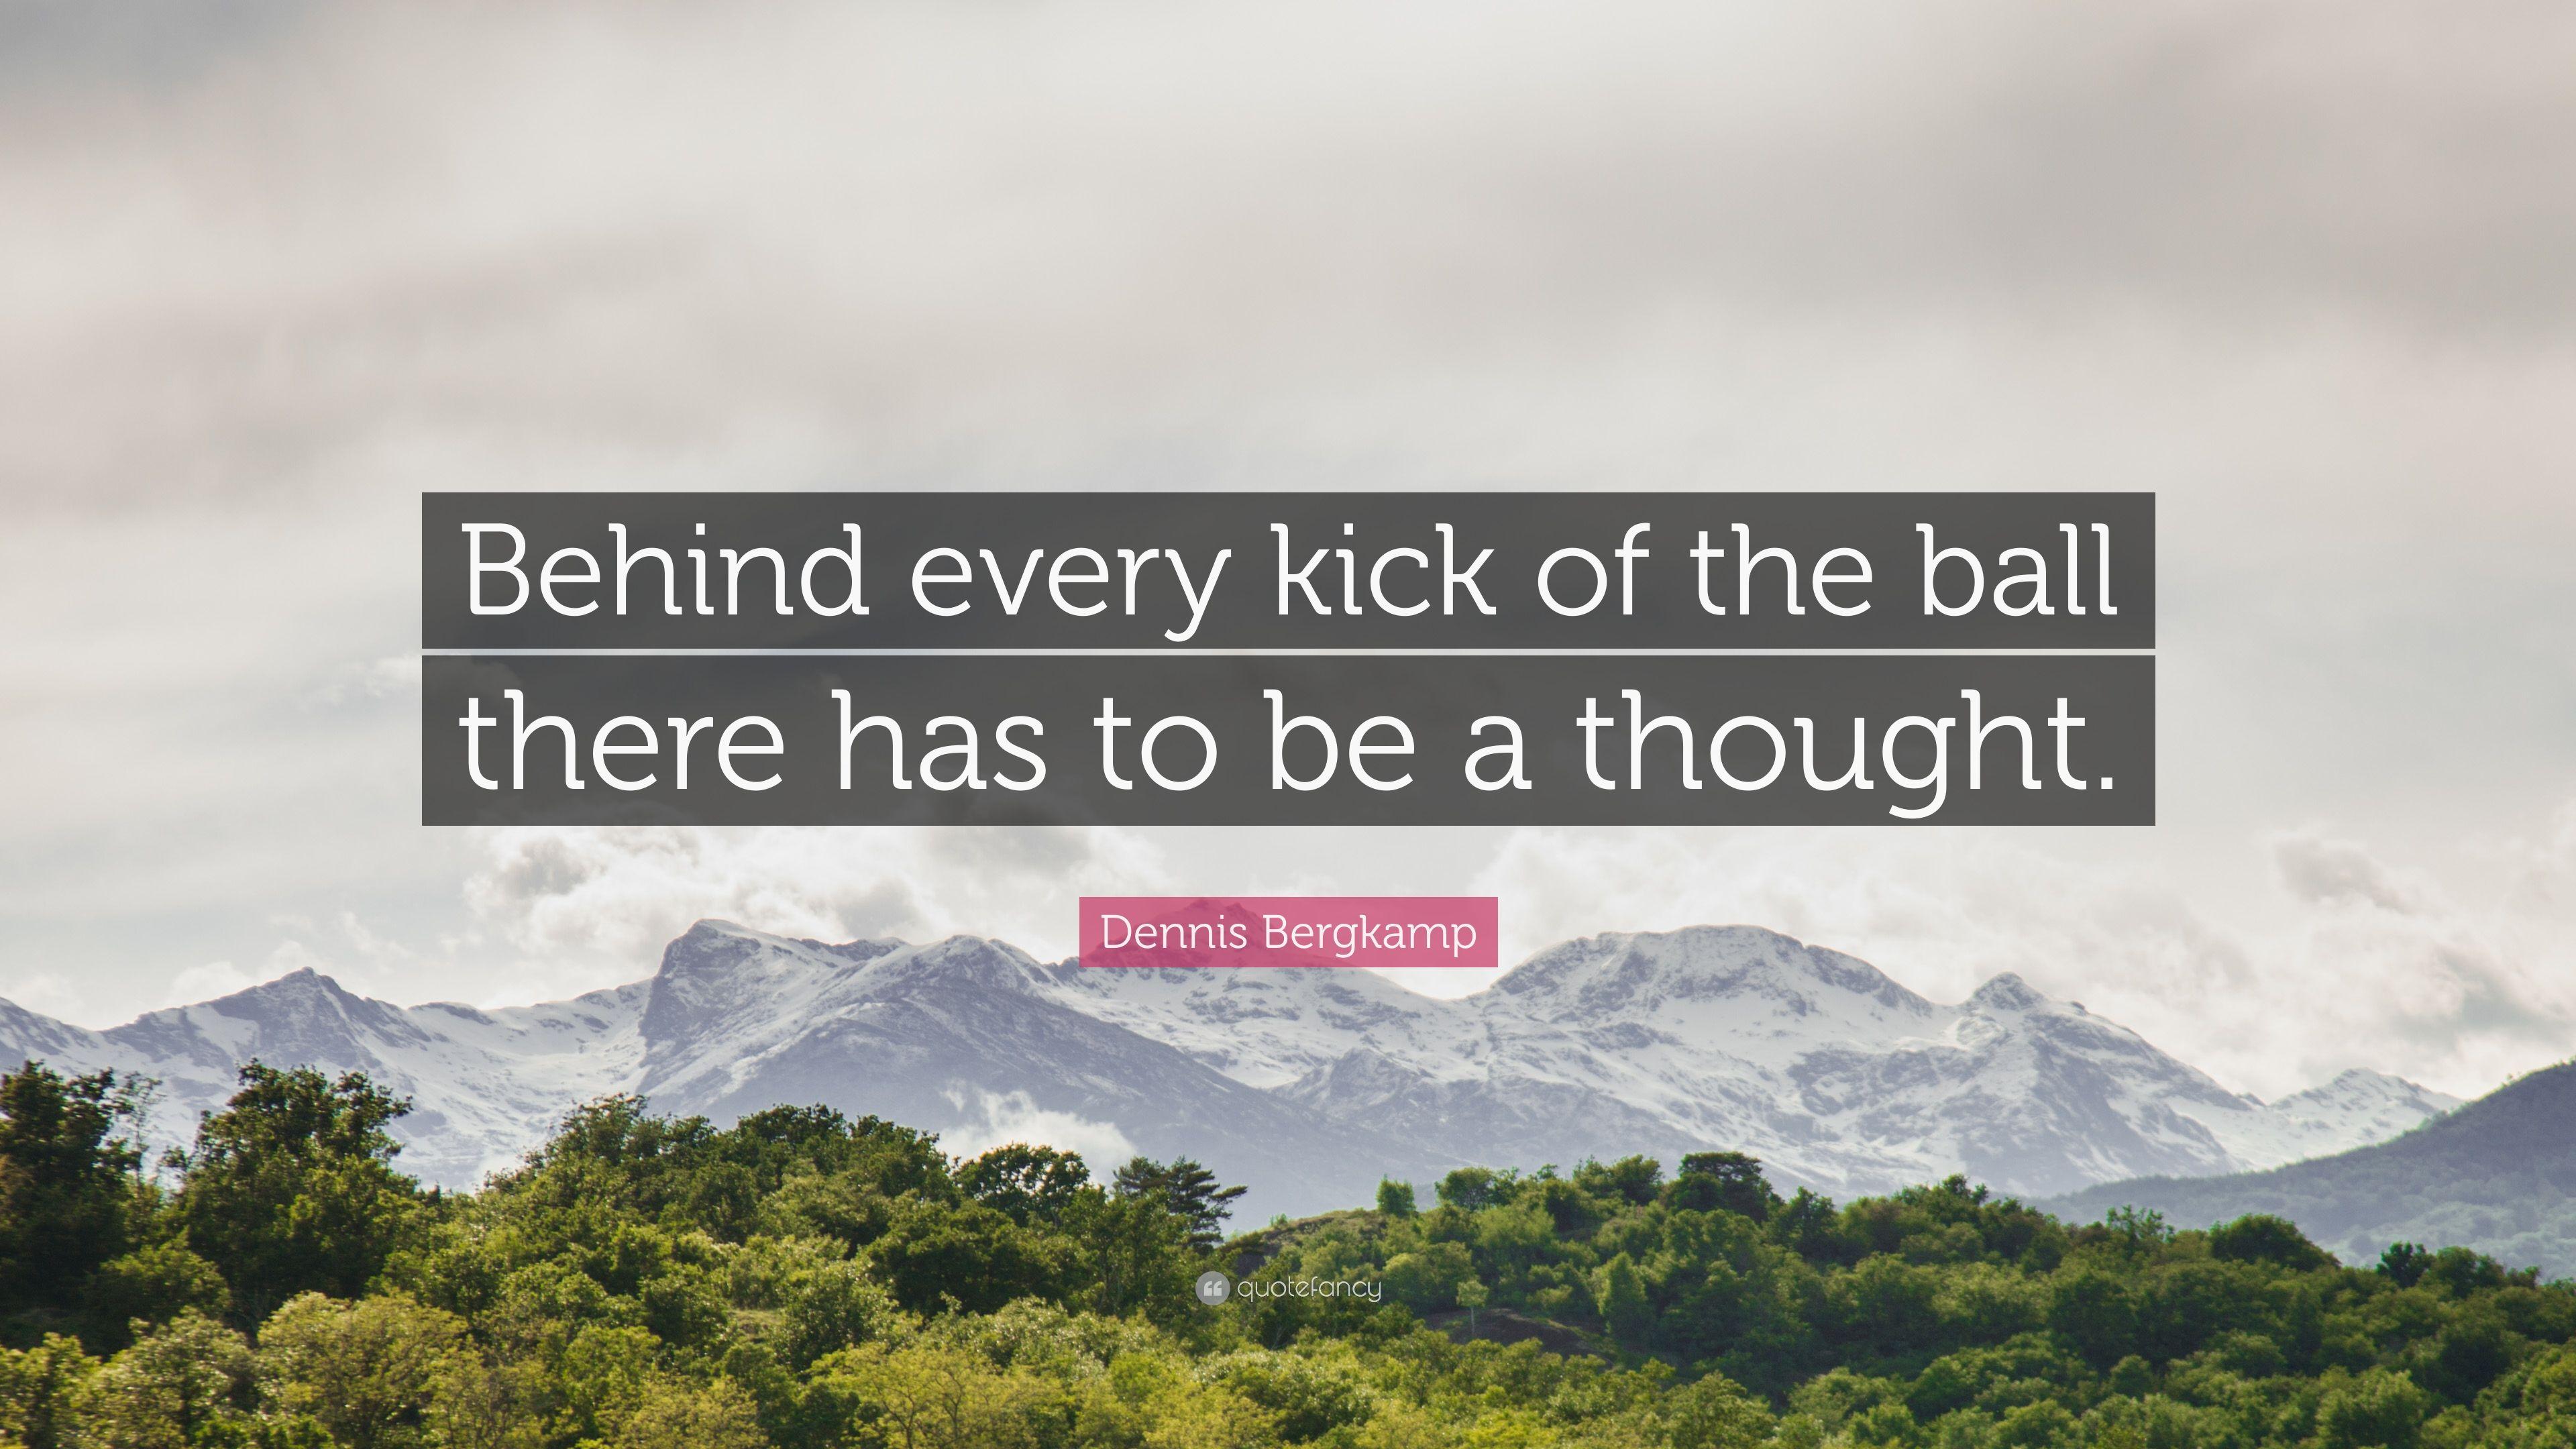 Dennis Bergkamp Quote: “Behind every kick of the ball there has to